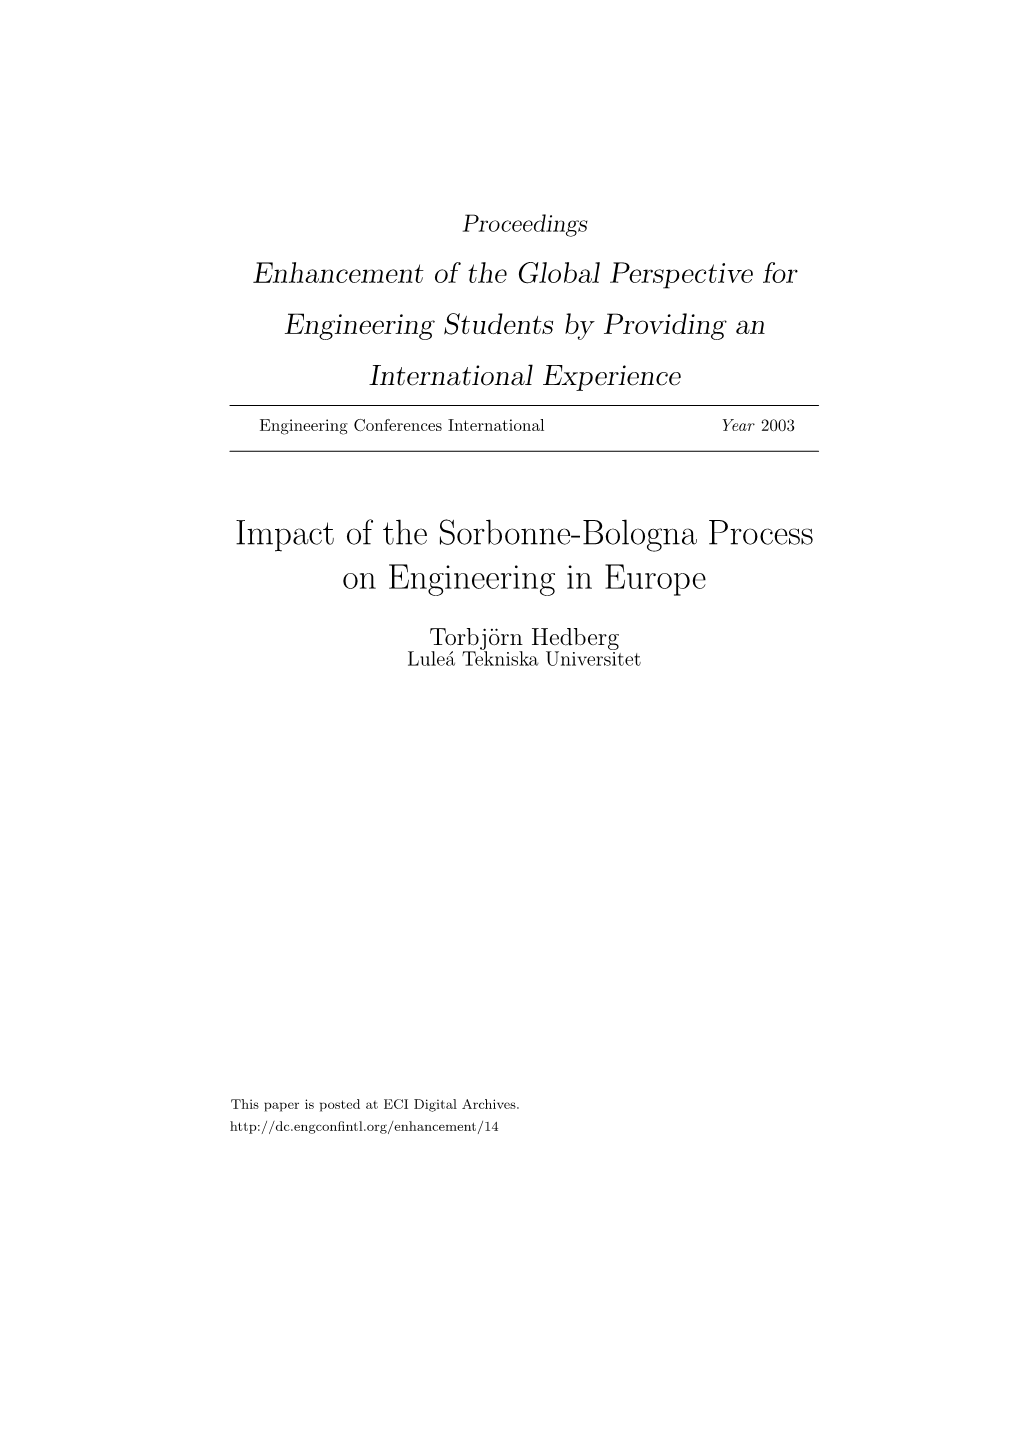 Impact of the Sorbonne-Bologna Process on Engineering in Europe